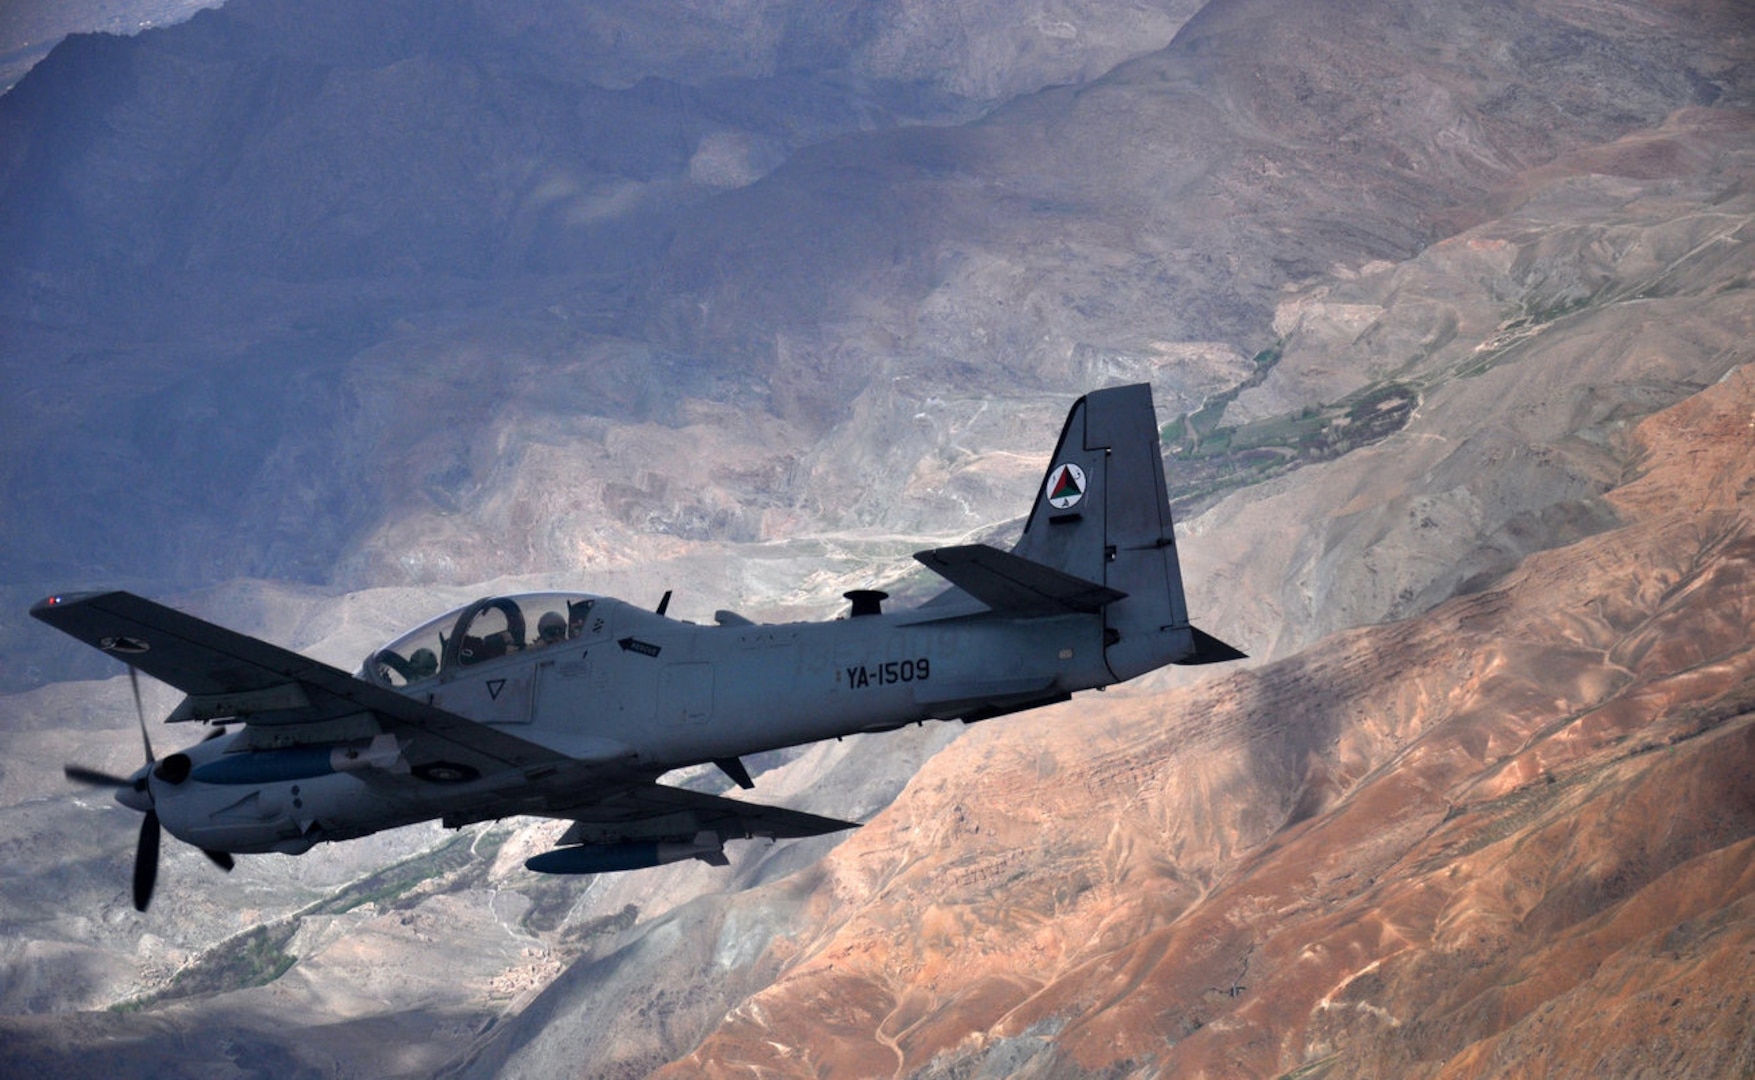 An Afghan air force A-29 Super Tucano aircraft flies over Afghanistan during a training mission, April 6, 2016. NATO Train, Advise, Assist Command-Air works daily to assist the Afghan air force in improving its capabilities. (Air Force photo by Capt. Eydie Sakura) 